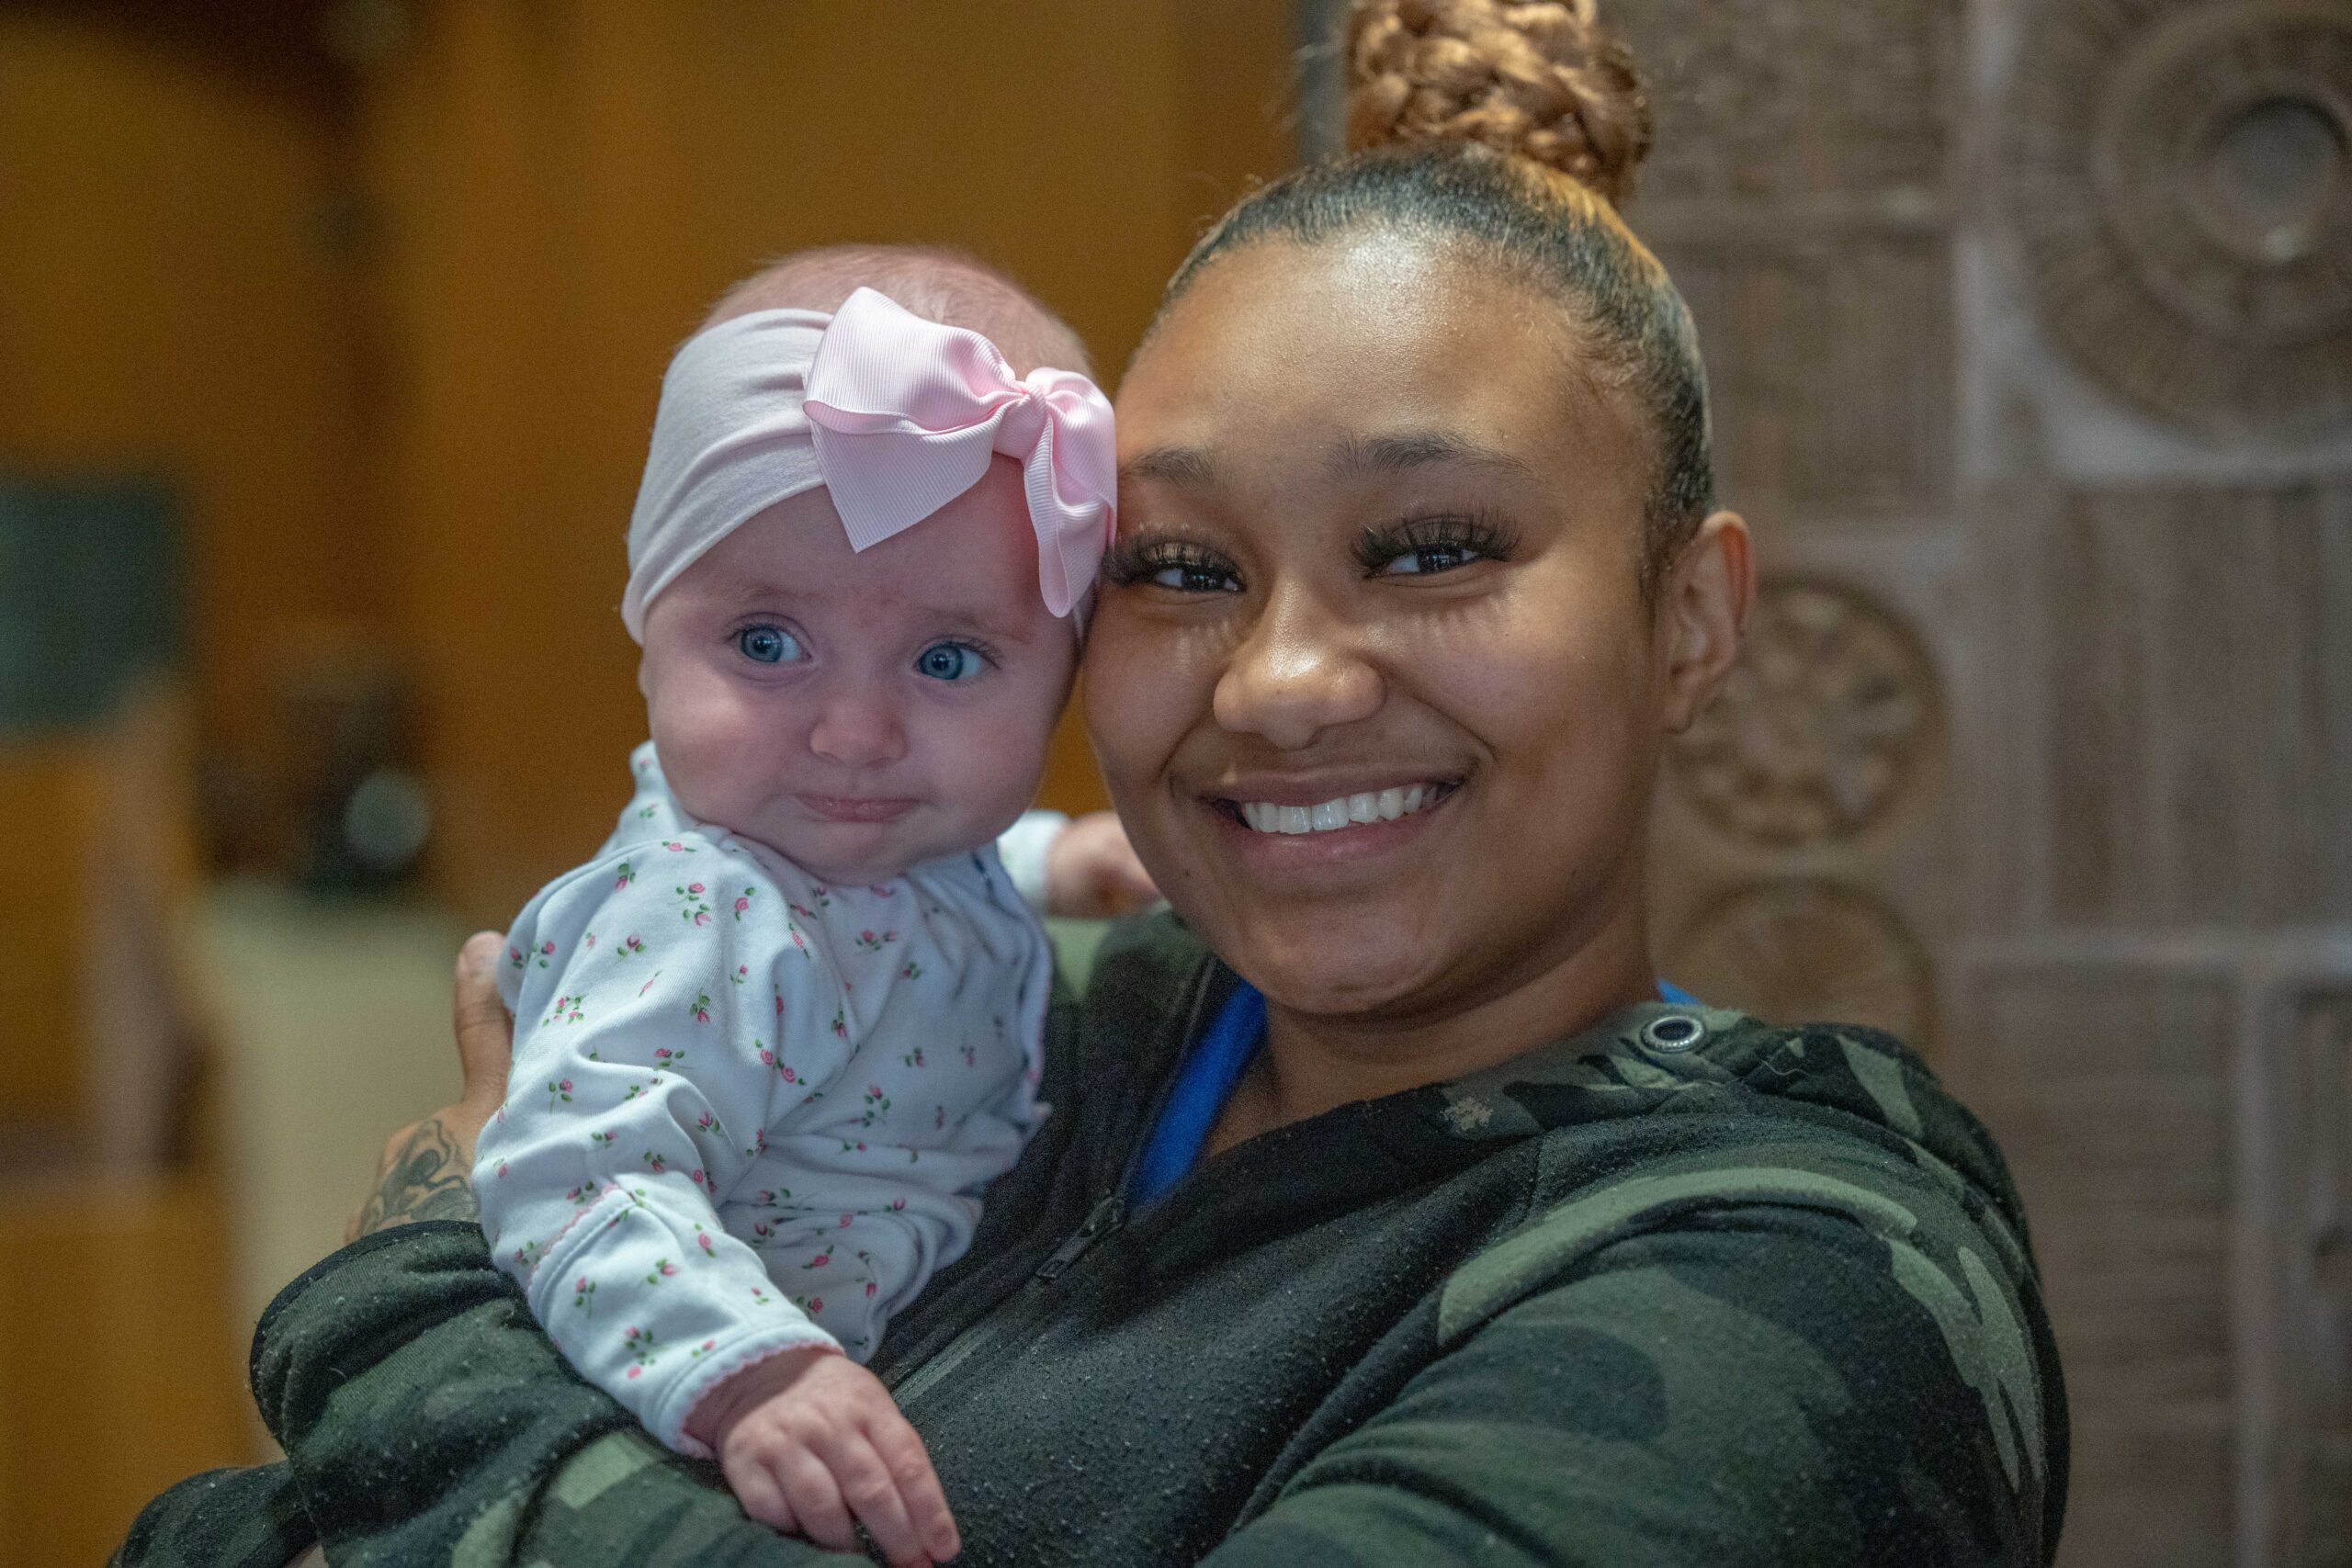 A young woman in a sweatshirt with a big smile holds a baby girl in a white onesie and large pink bow.